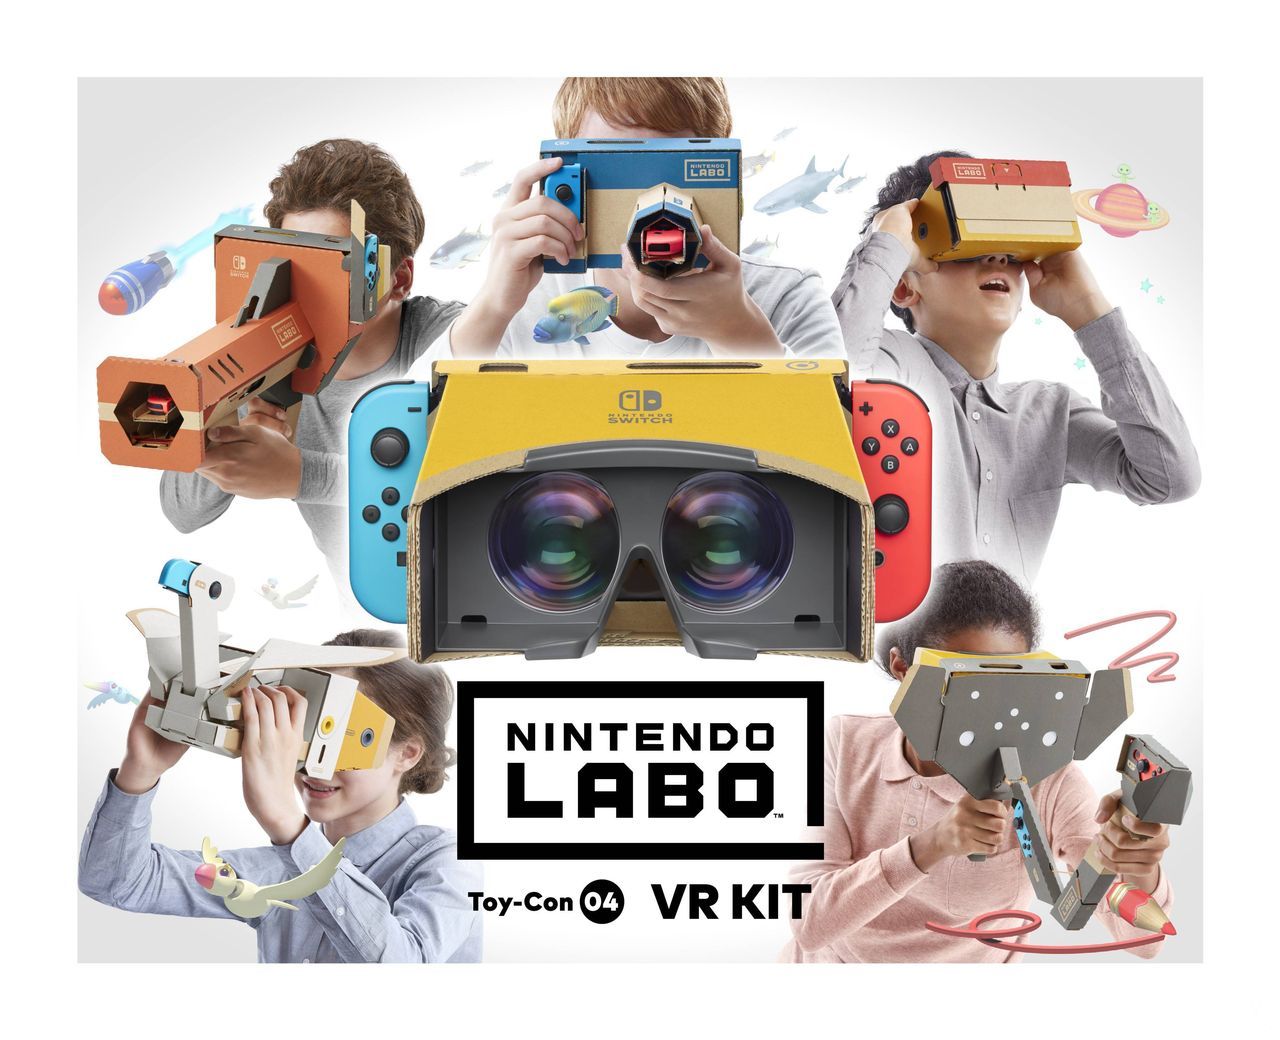 The virtual reality of Nintendo Labo is presented in this extensive trailer